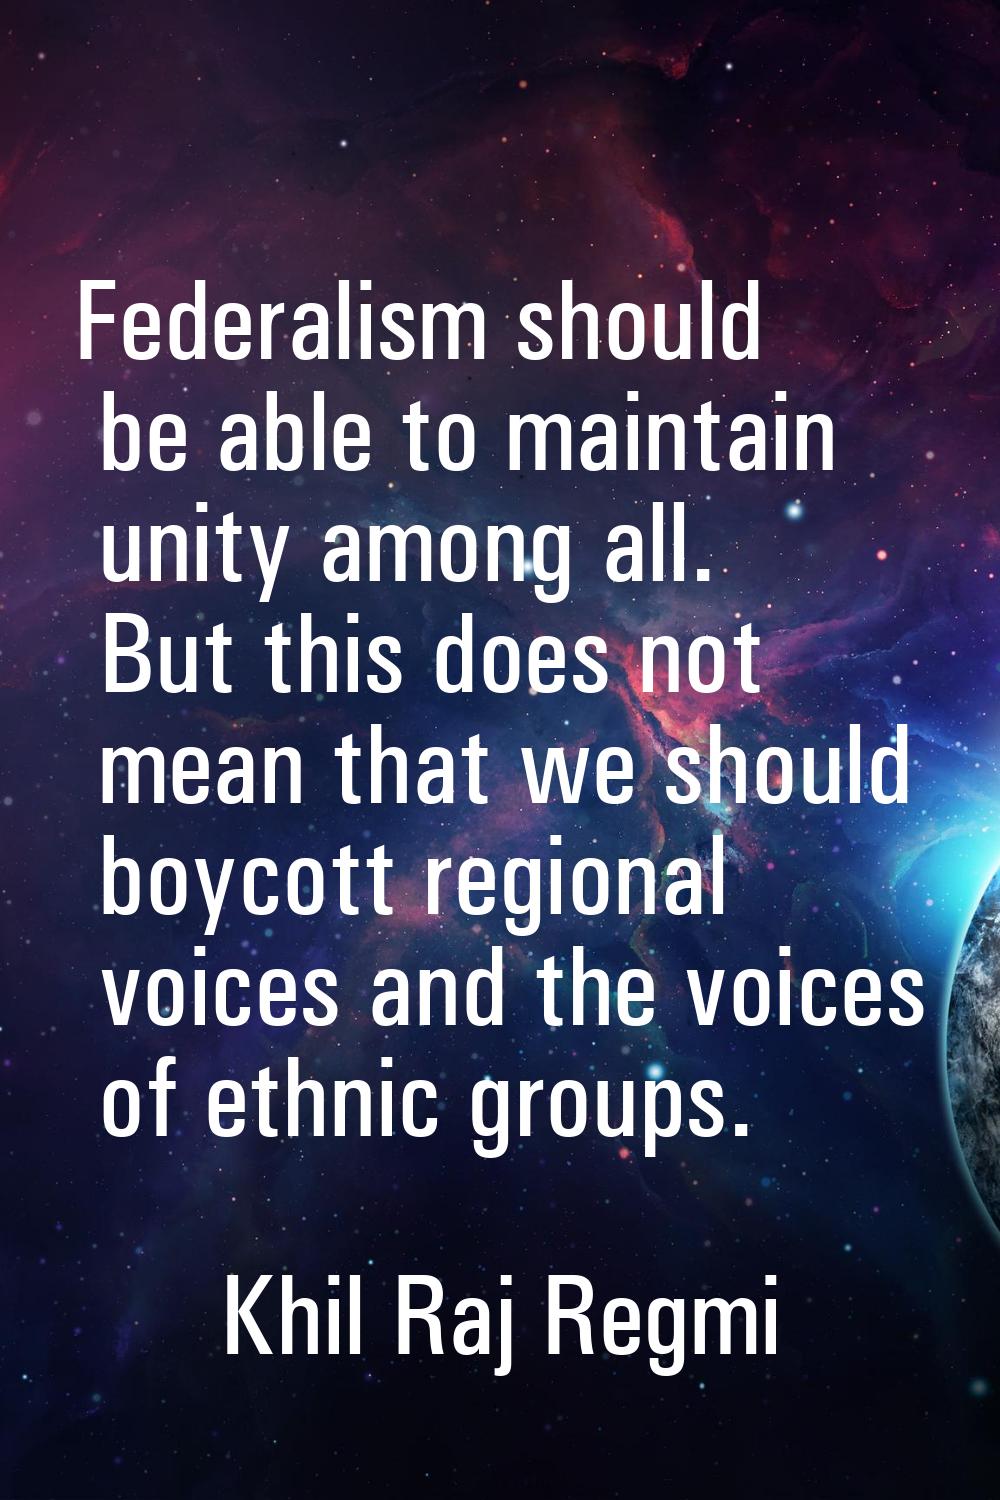 Federalism should be able to maintain unity among all. But this does not mean that we should boycot